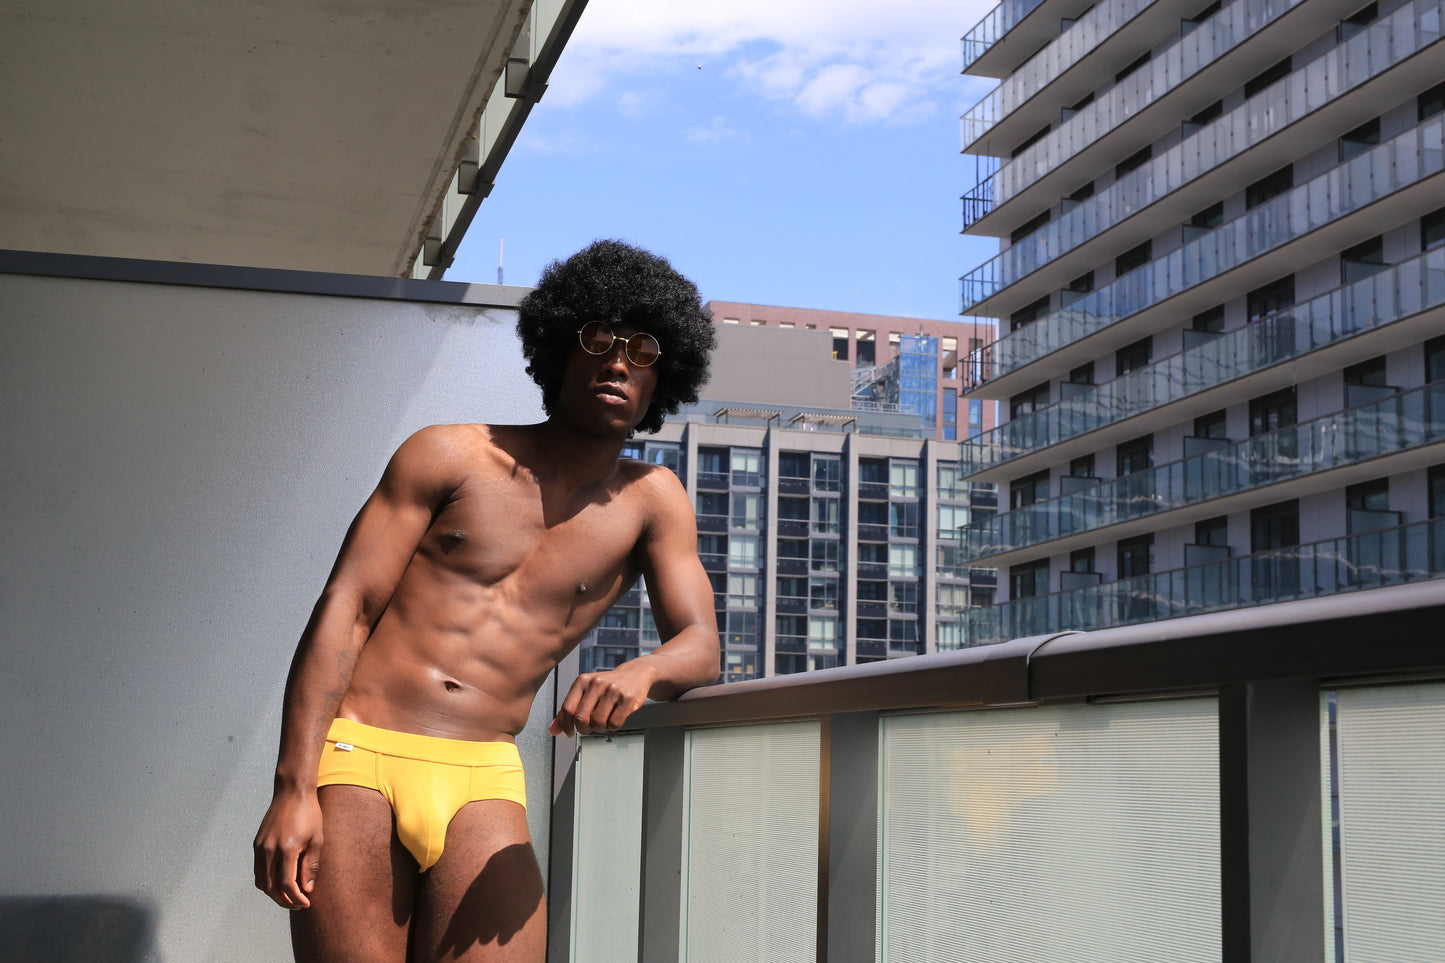 The Carnival Yellow Brief